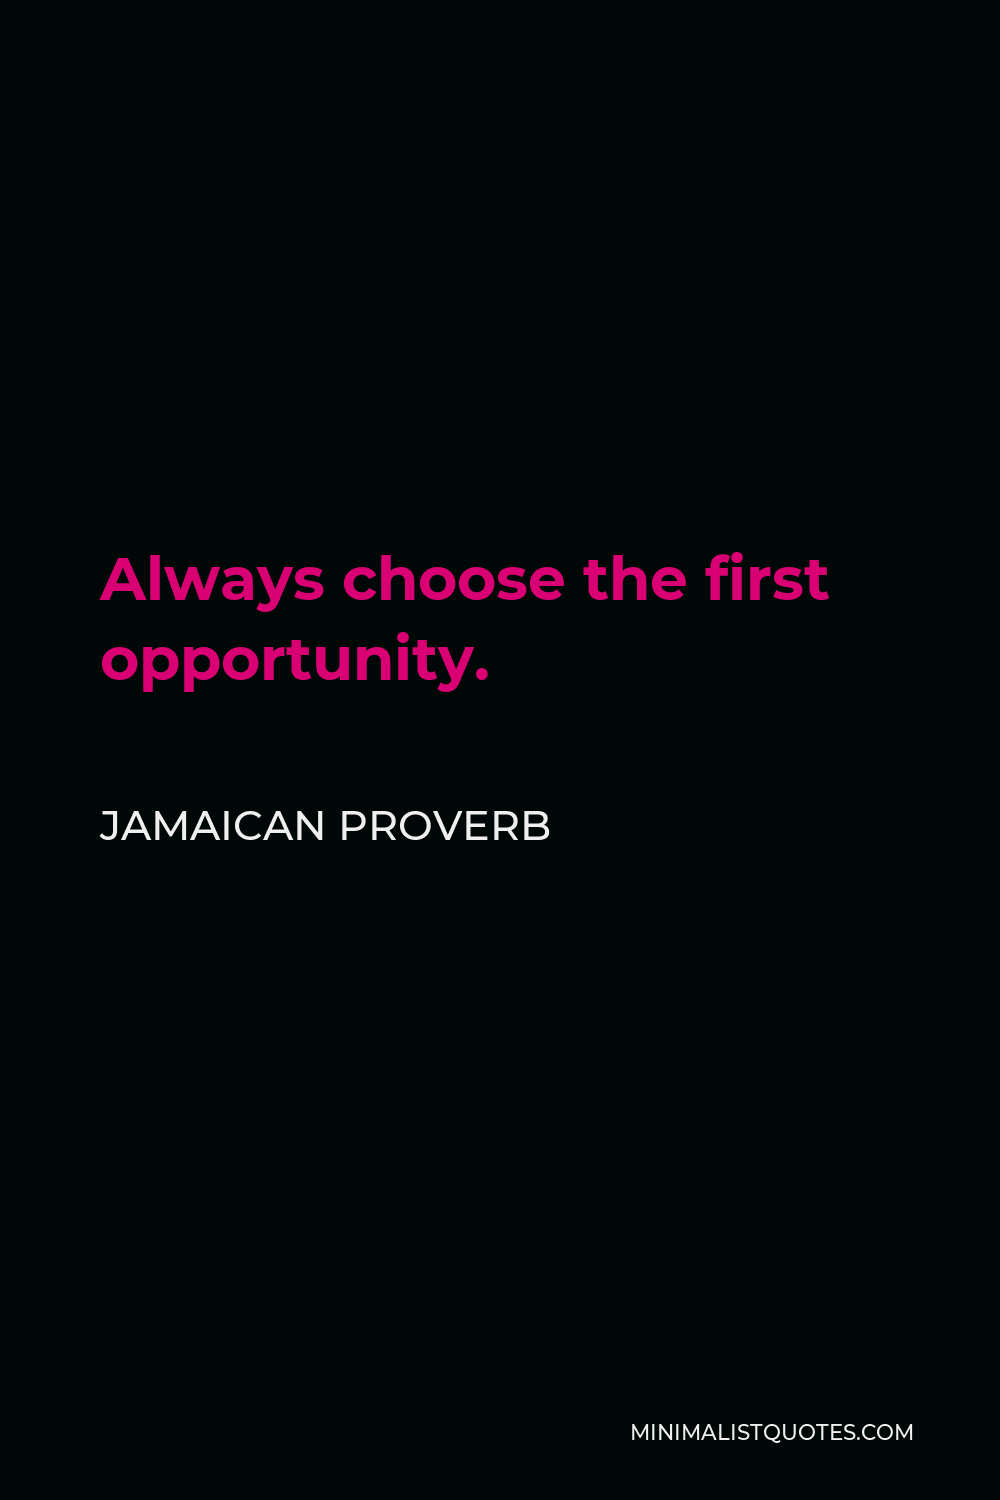 Jamaican Proverb Quote - Always choose the first opportunity.